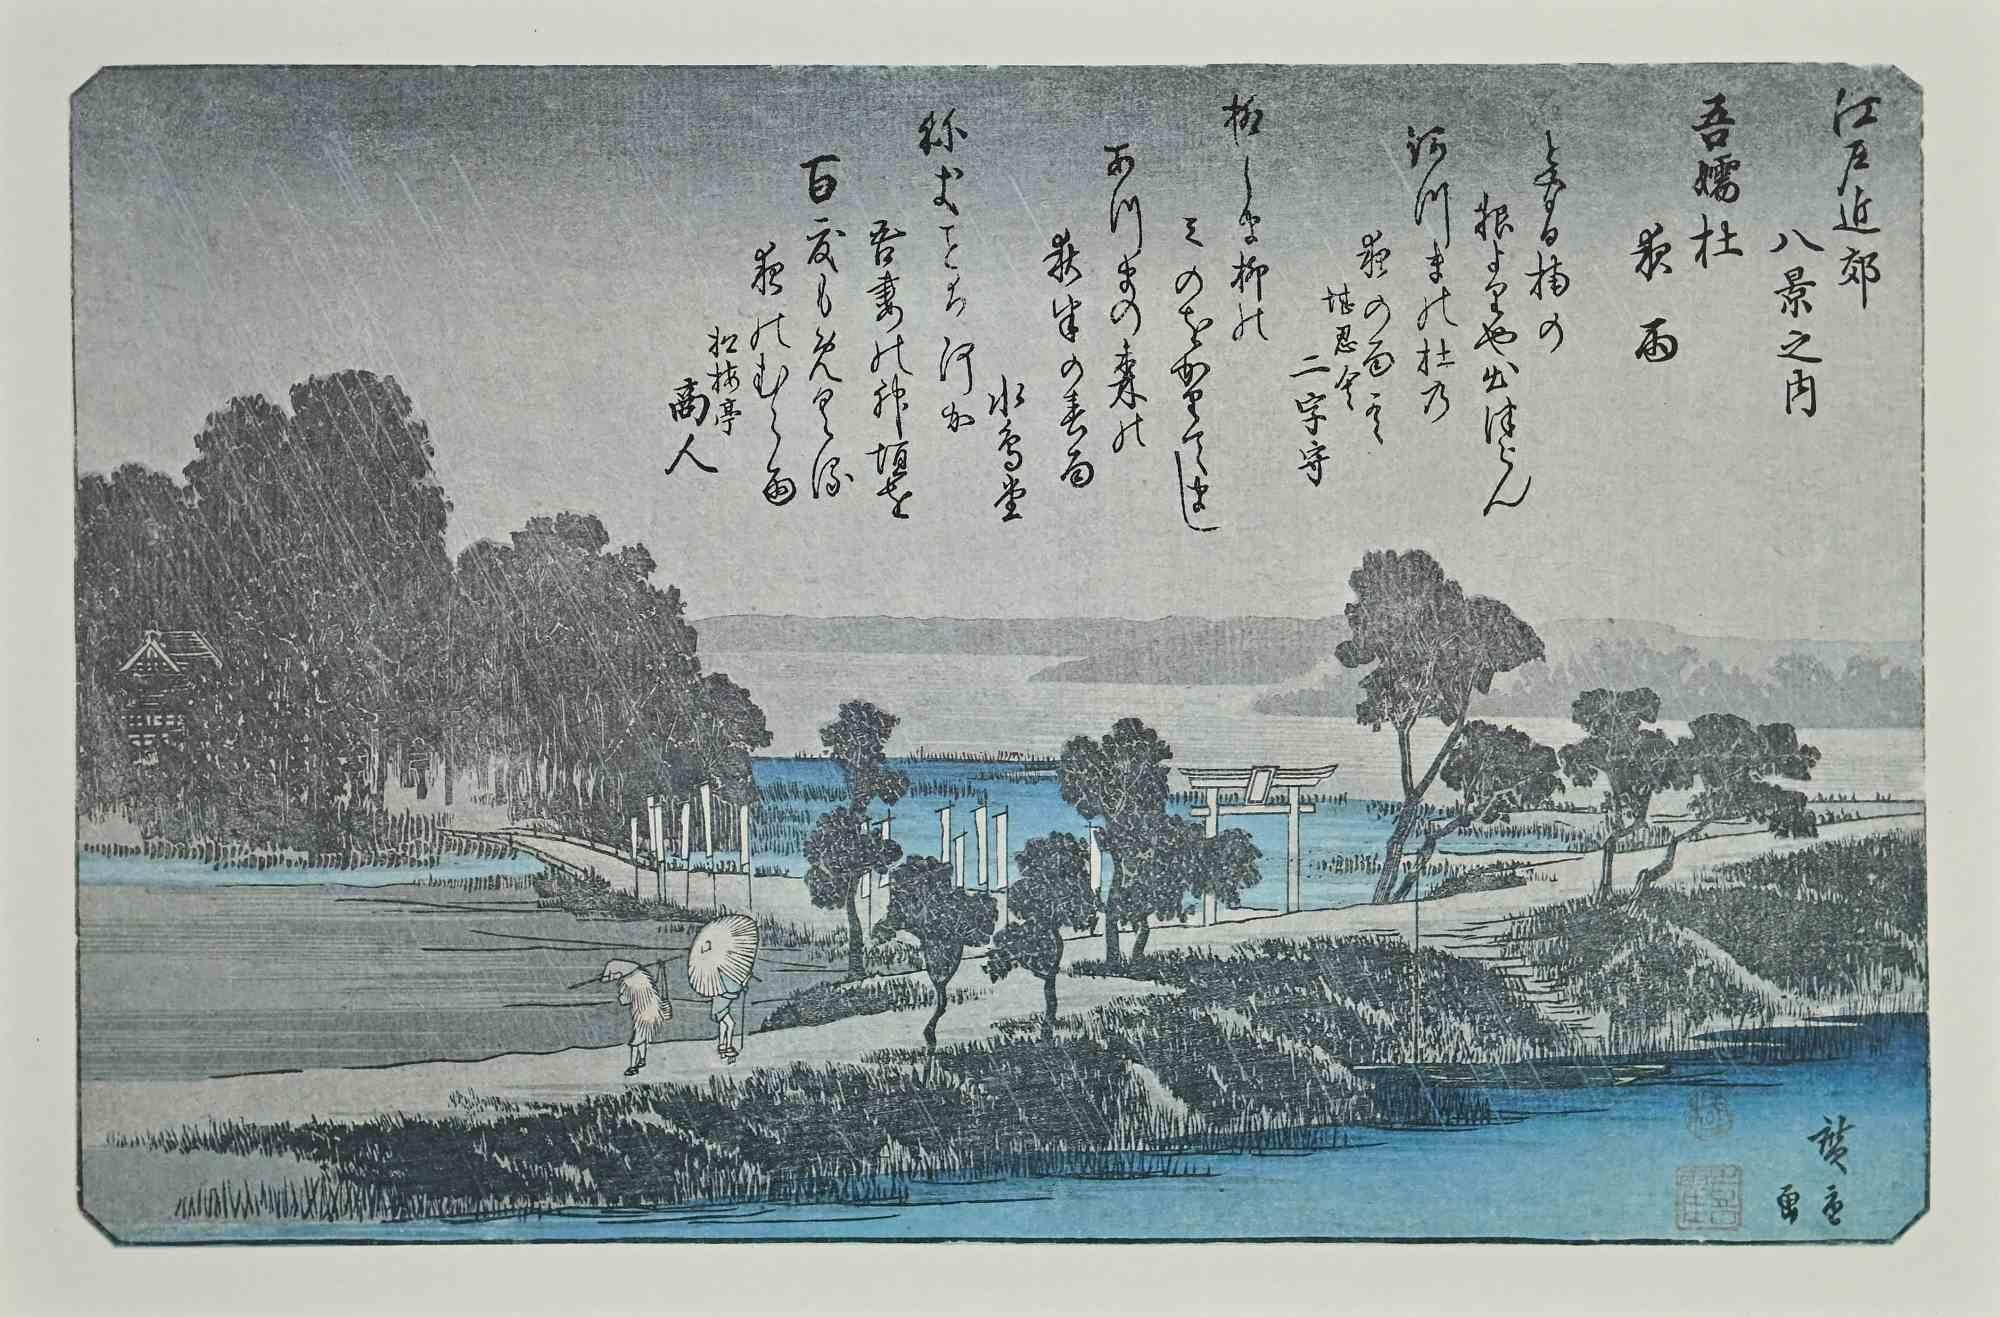 The Rain - Eight Scenic Spots in Suburban Edo is a modern artwork realized in the Mid-20th Century.

Mixed colored lithograph after a woodcut realized by the great Japanese artist Utagawa Hiroshige in the 19th century.

Very Good